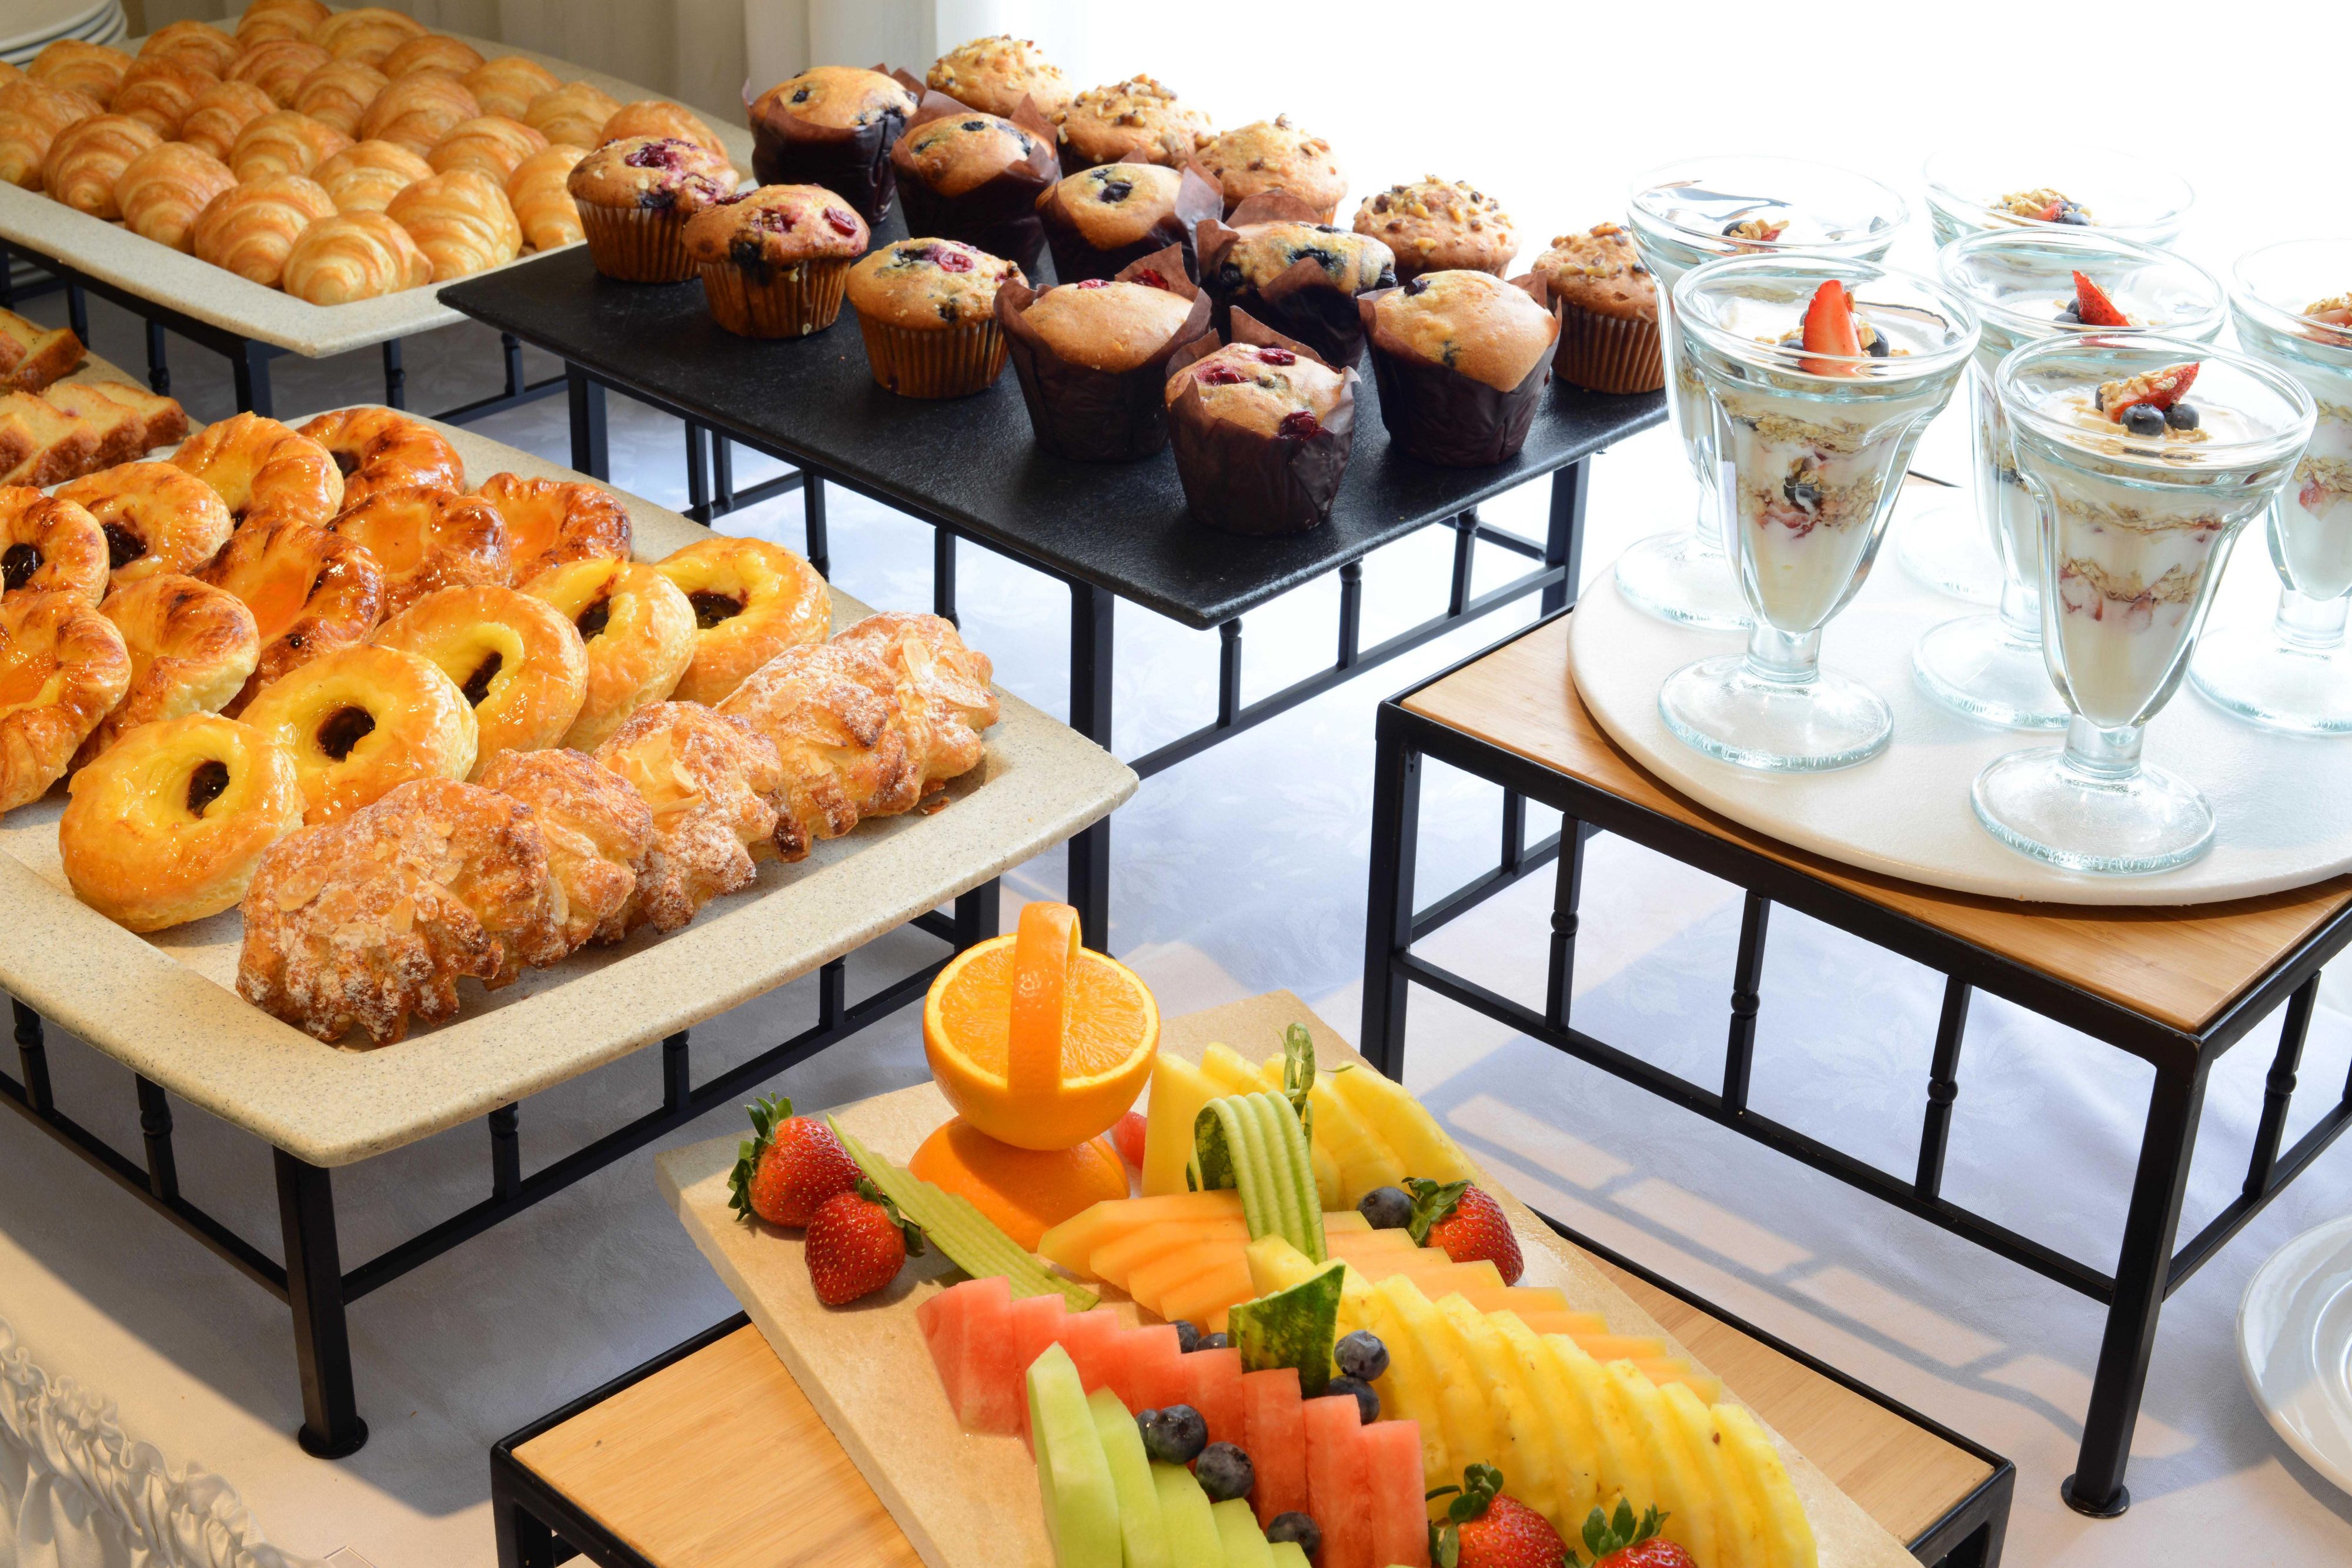 Continental Breakfast Buffet with many delicious options